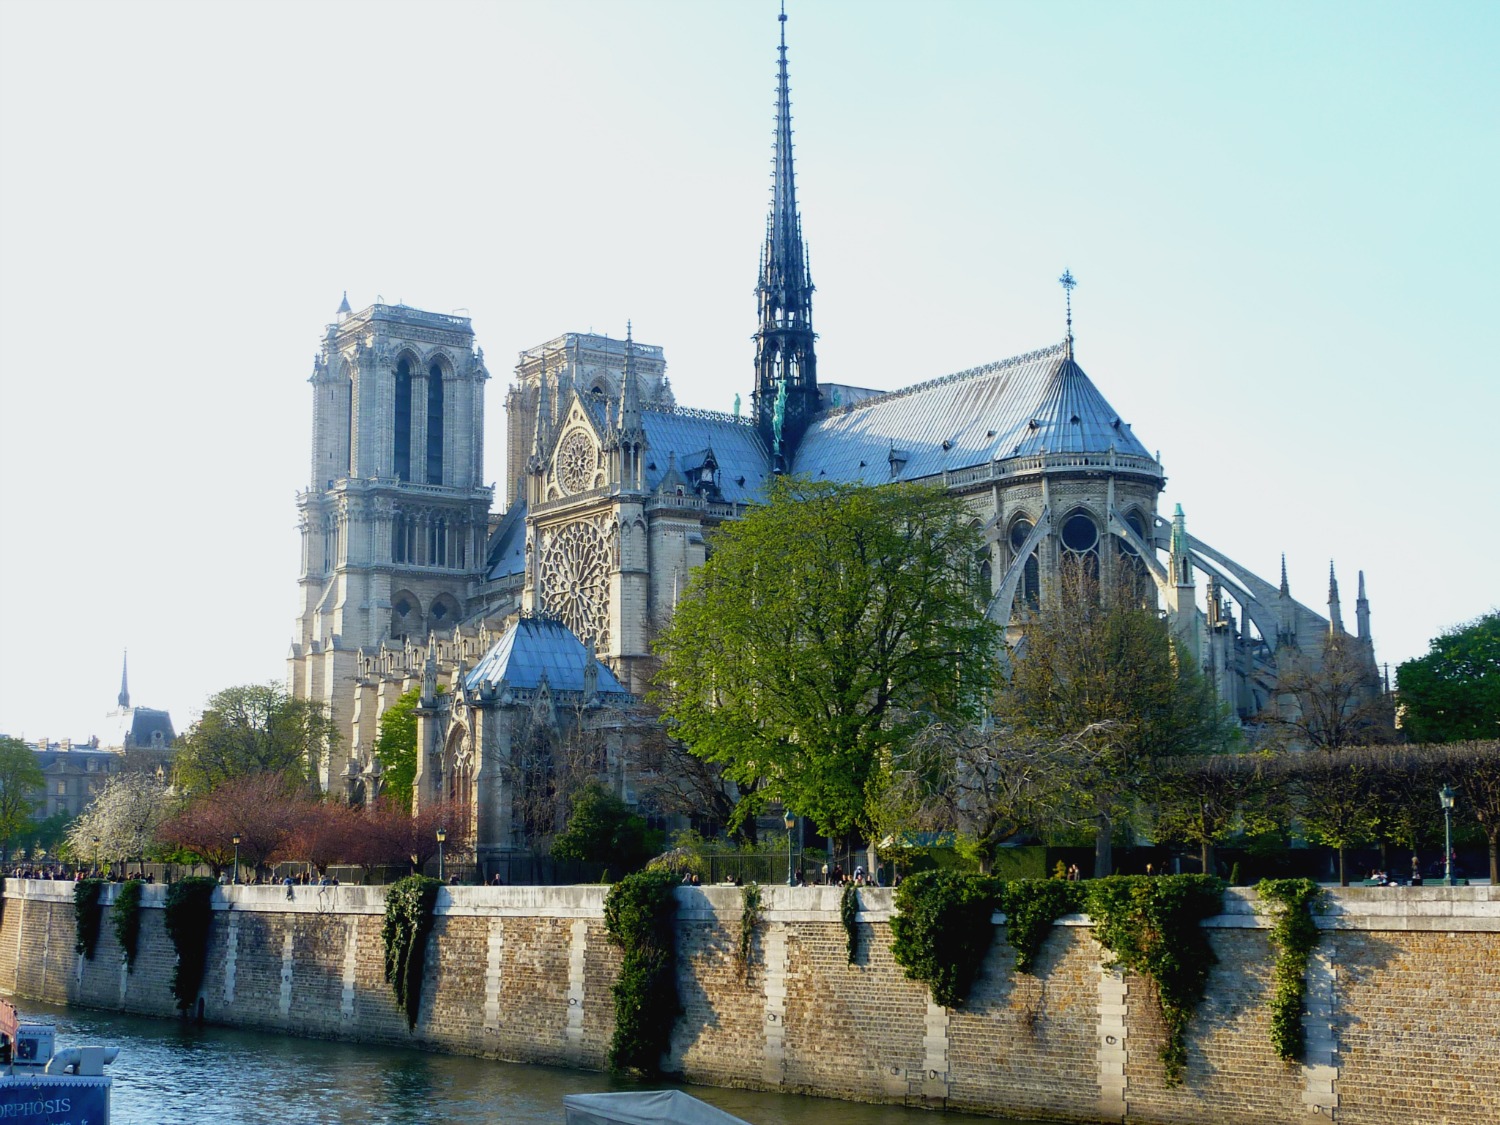 The rear view of Notre Dame Cathedral in Paris is not to be missed, especially in Spring